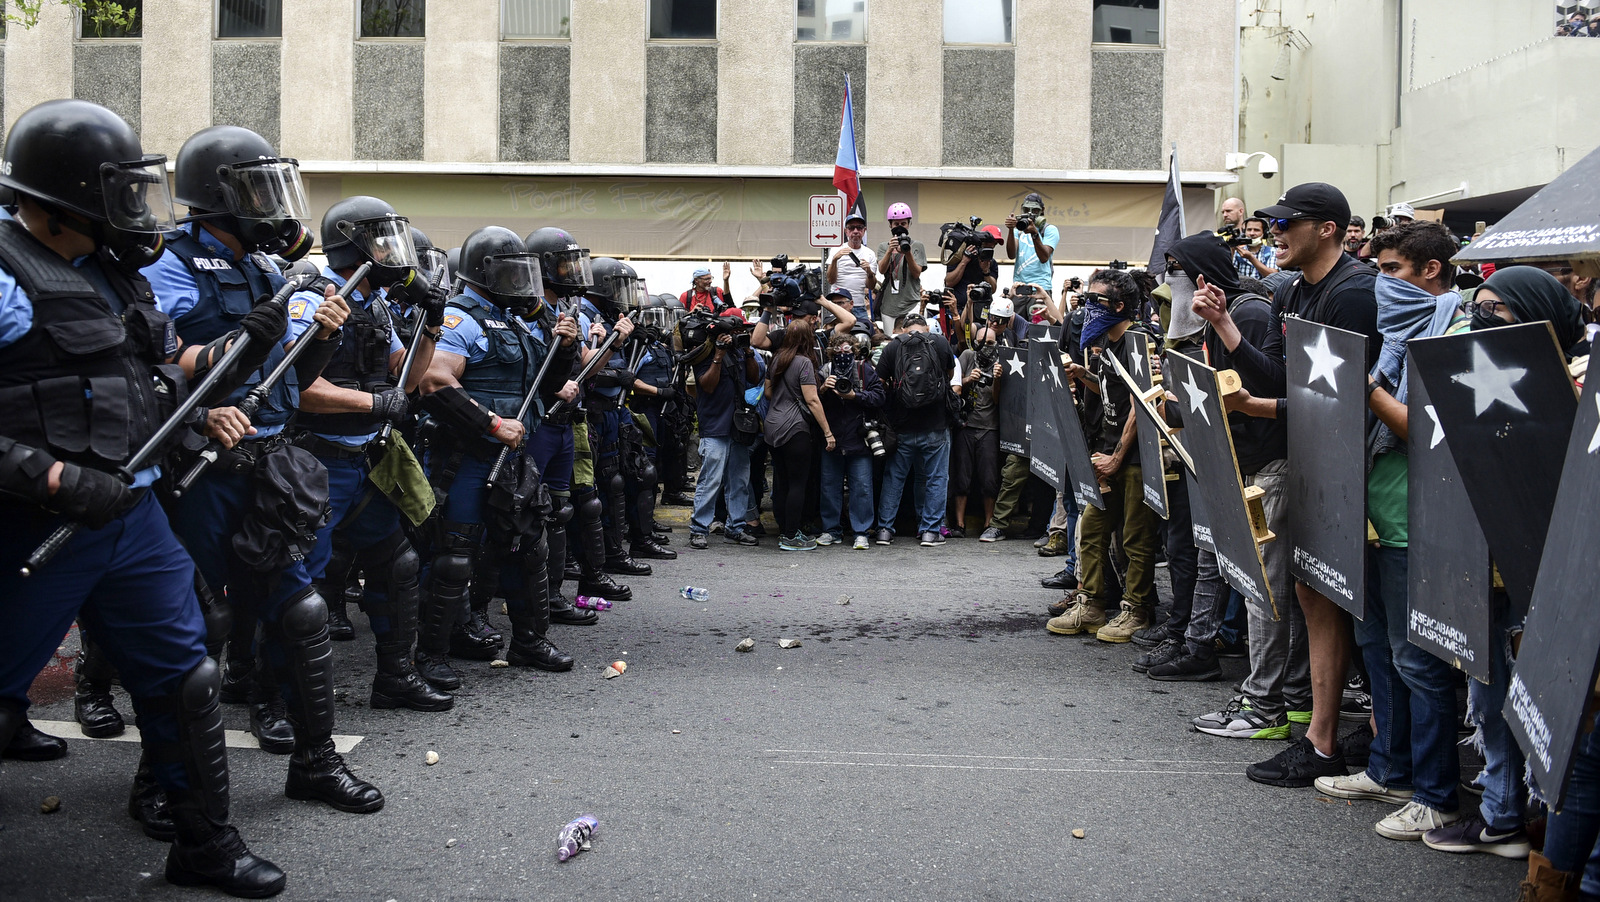 Police and protesters face off after a May Day march turned violent, in San Juan, Puerto Rico, May 1, 2018. Protesters clashed with police who fired tear gas and rubber bullets to disperse the crowd. (AP/Carlos Giusti)